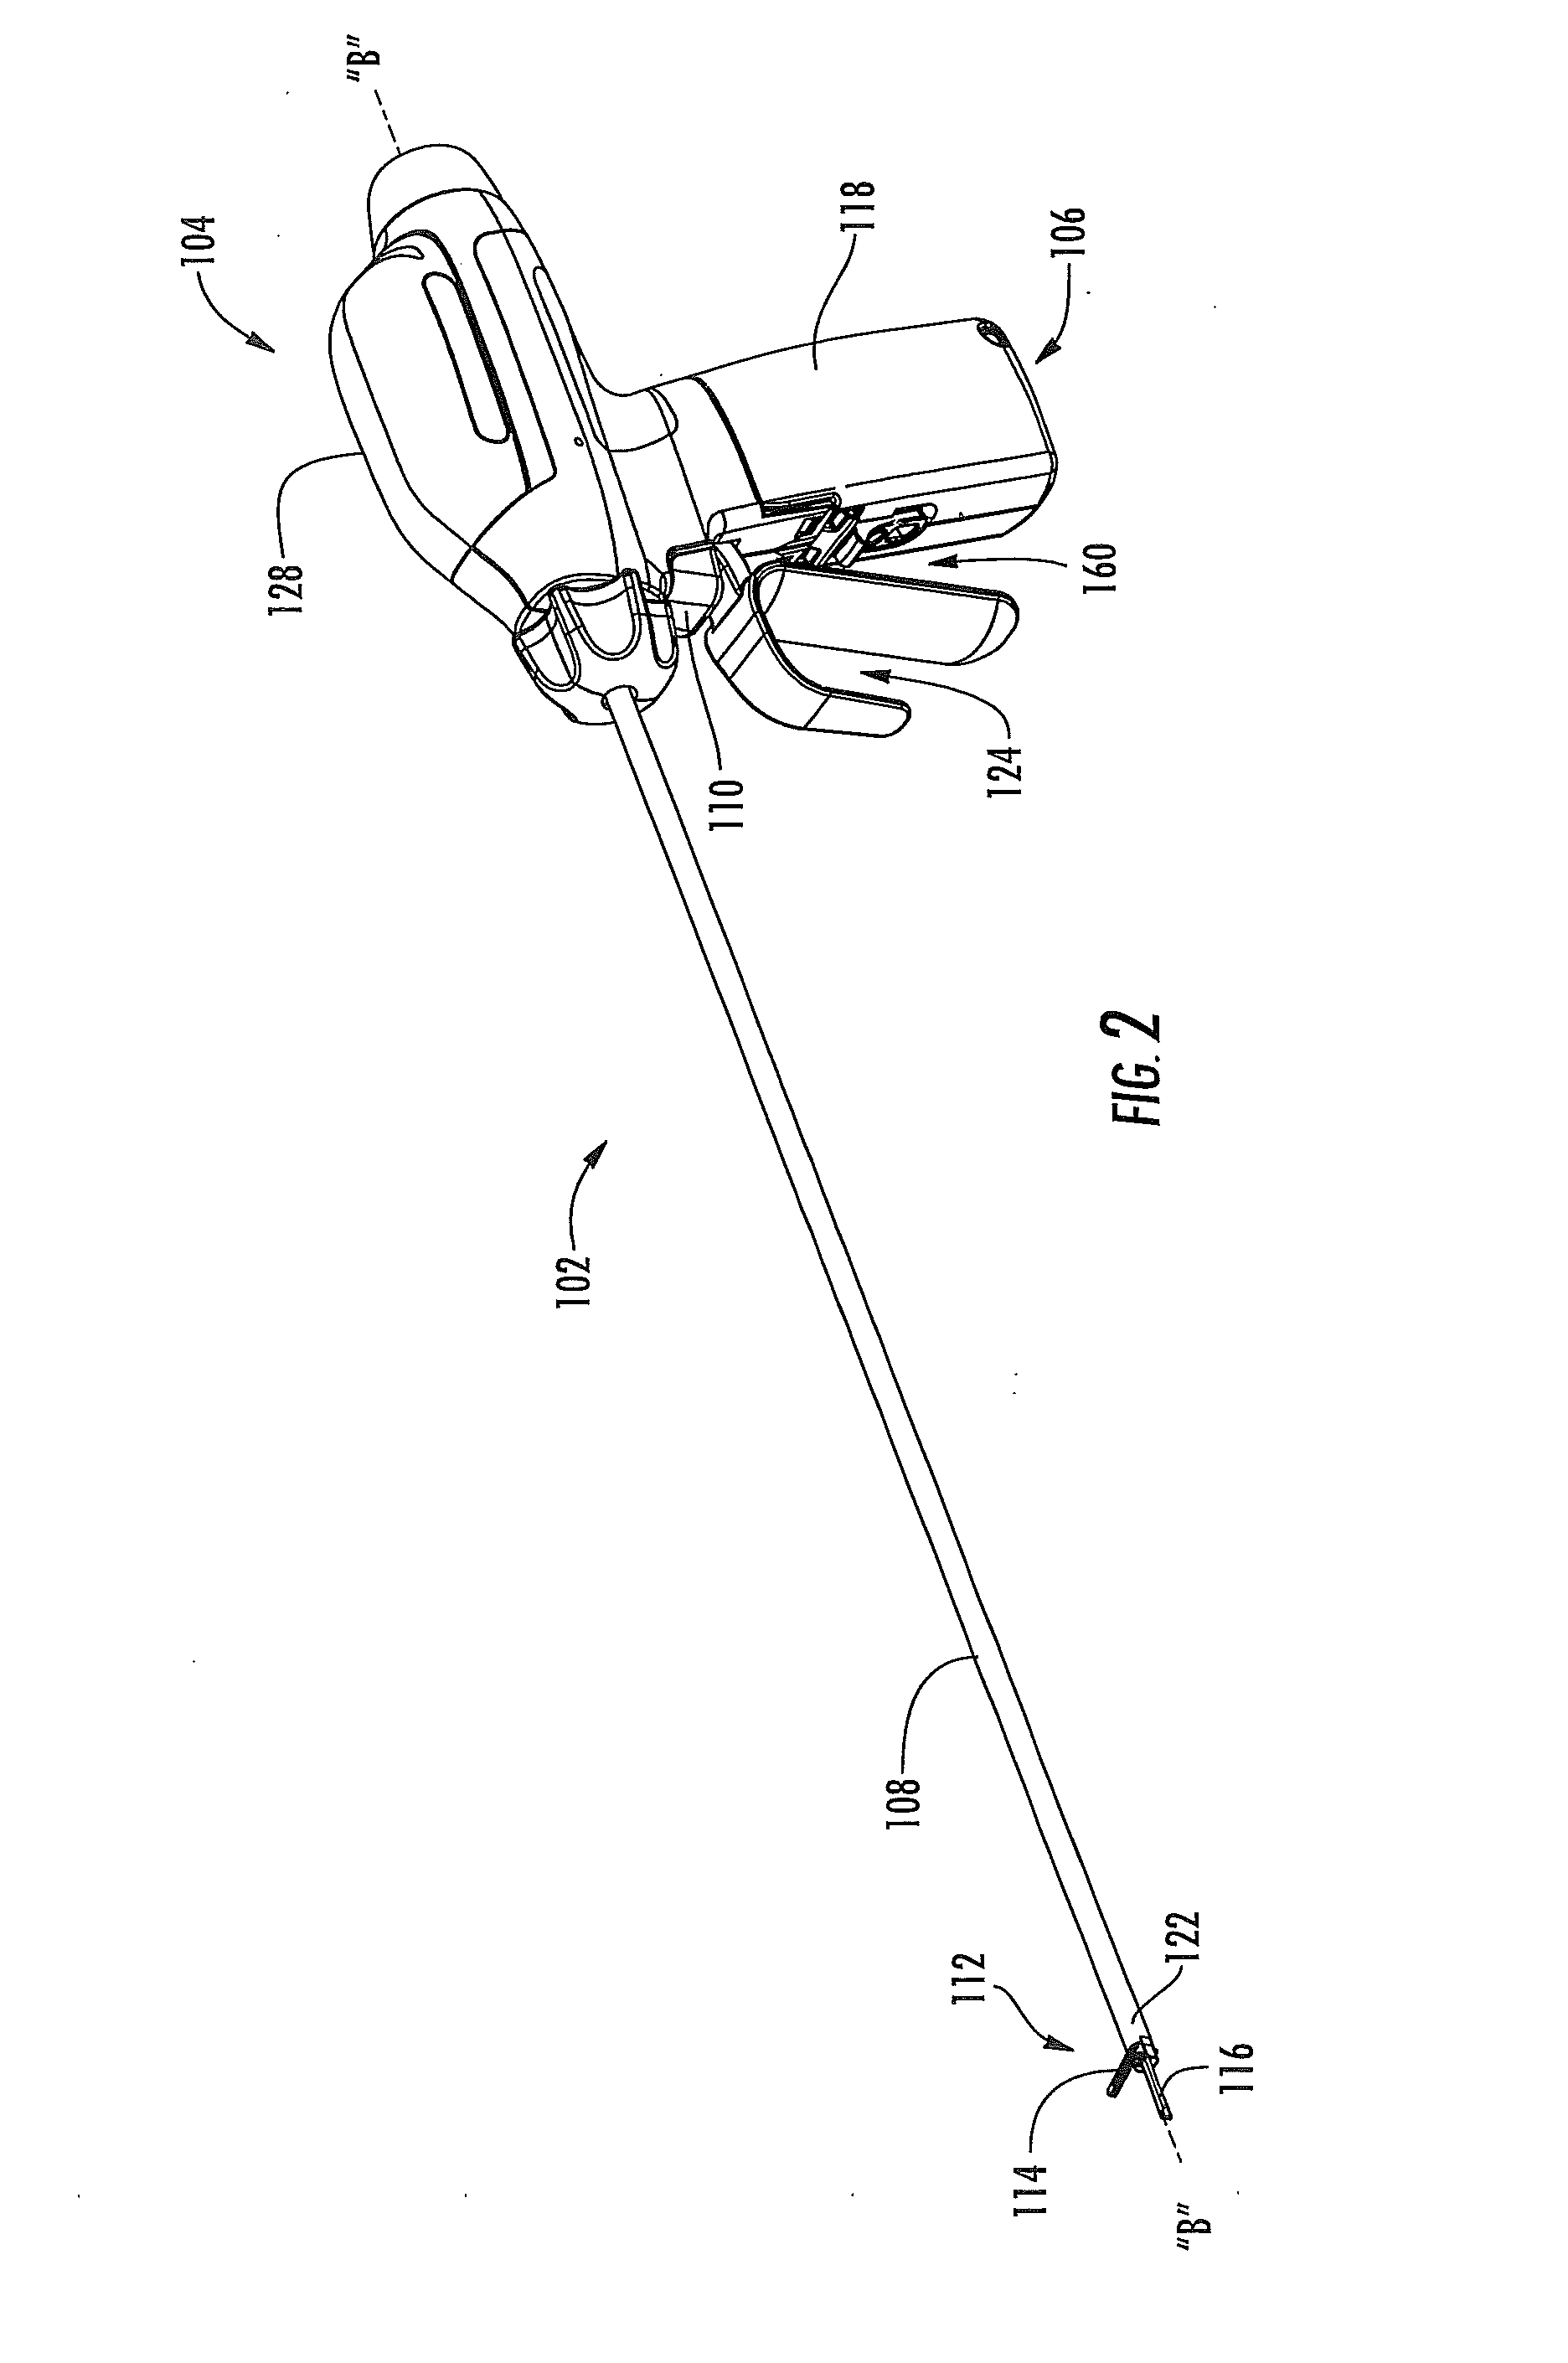 Aseptic bag to encapsulate an energy source of a surgical instrument